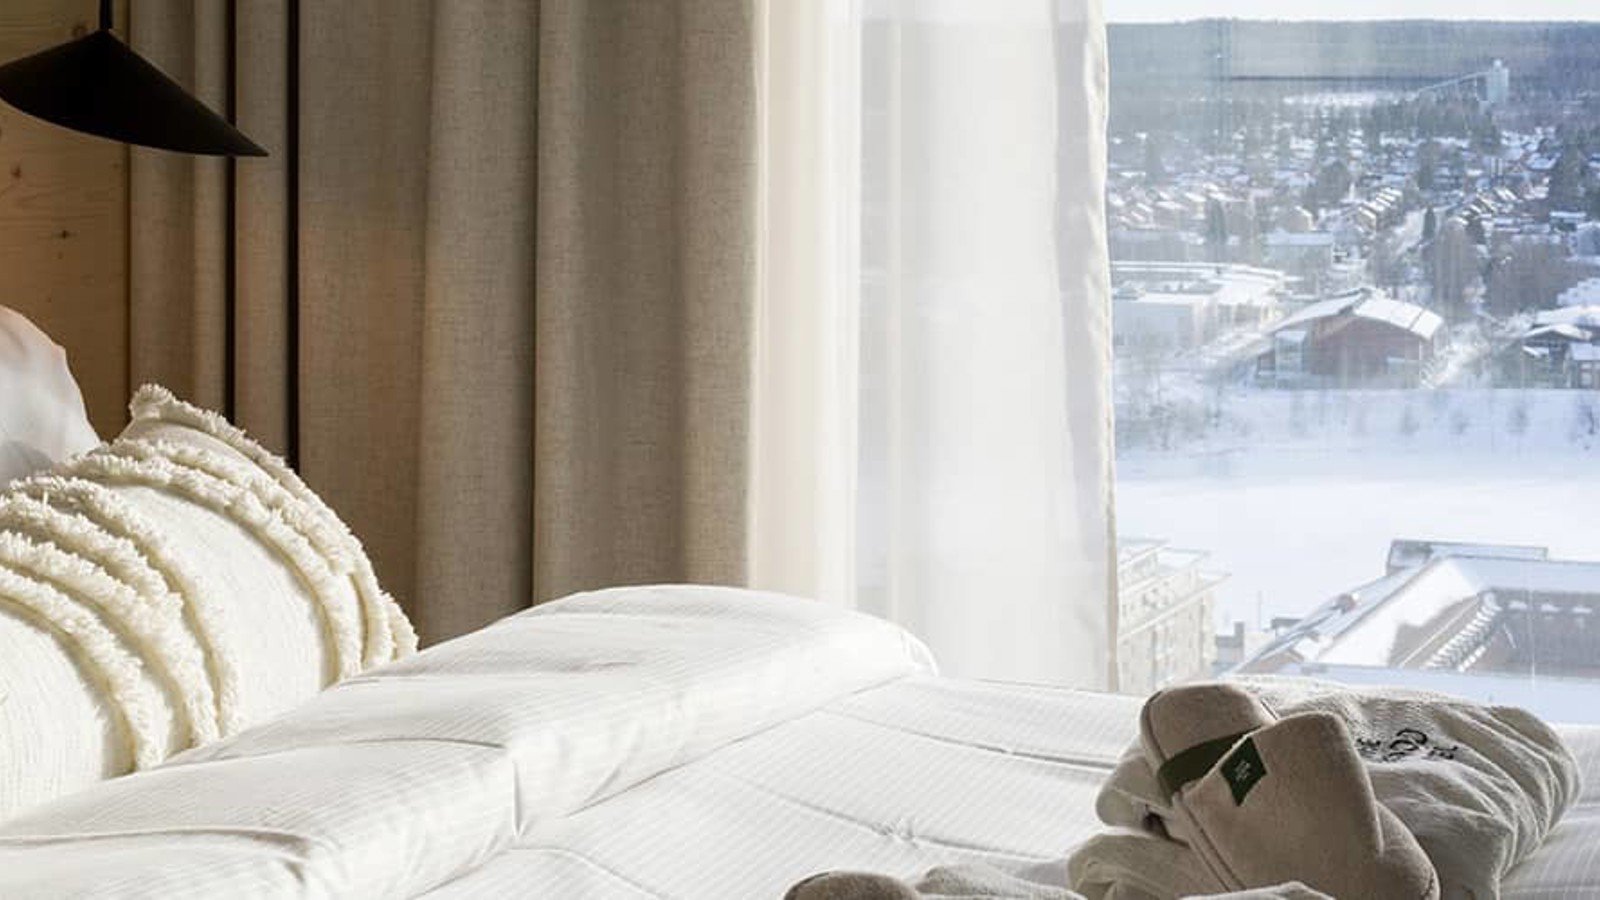 Cozy hotel room with a view of the winter landscape